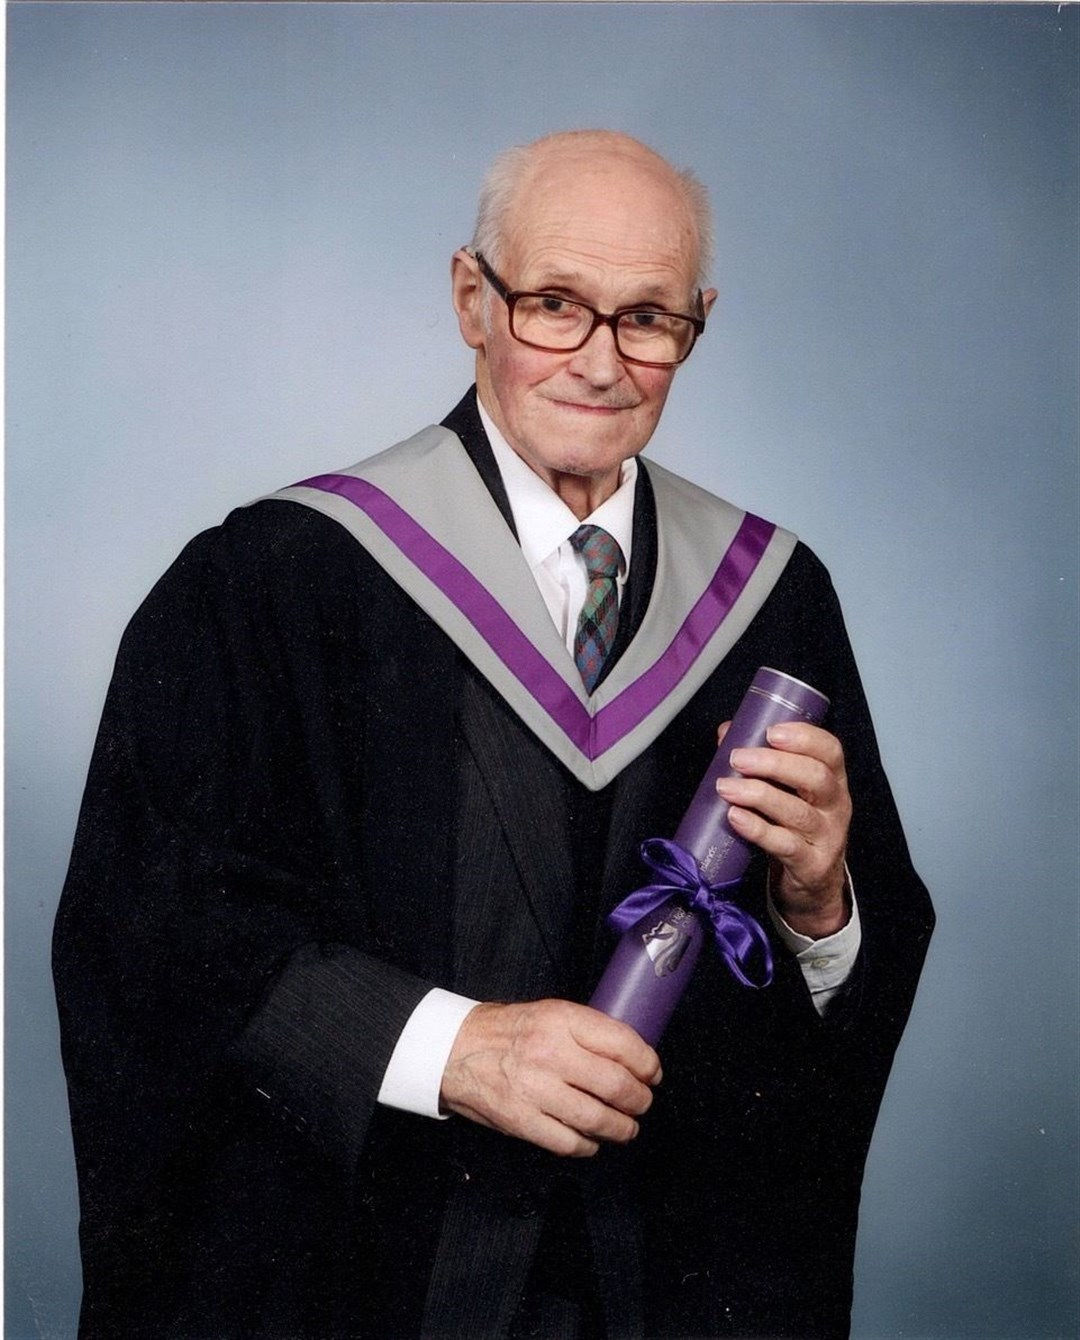 John Macdonald’s work in history, music and crofting policy was recognised when he was awarded an Honorary Fellowship from the University of the Highlands and Islands.